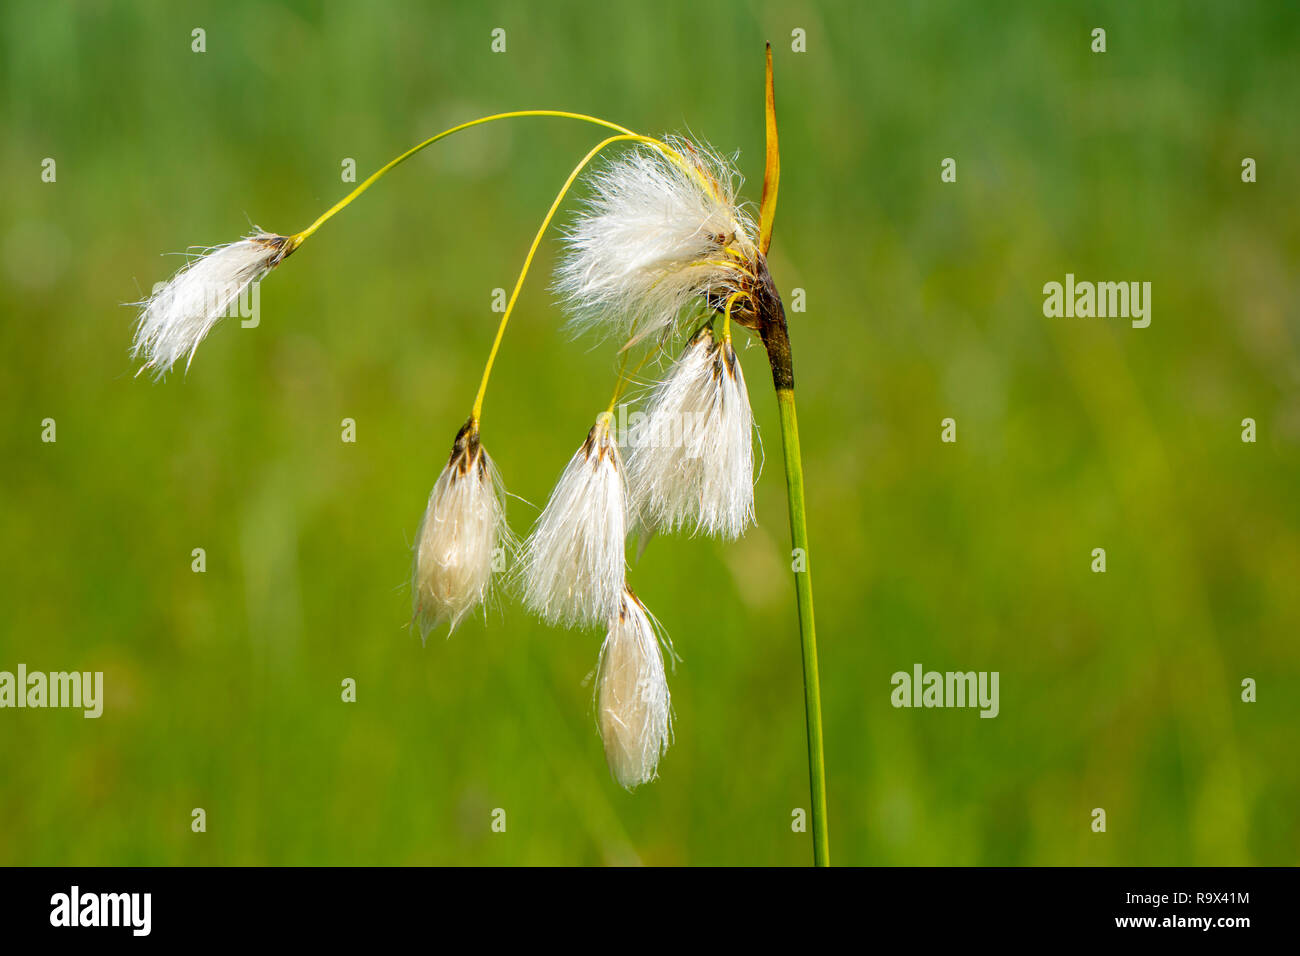 close-up of blooming flower head in meadow at springtime Stock Photo